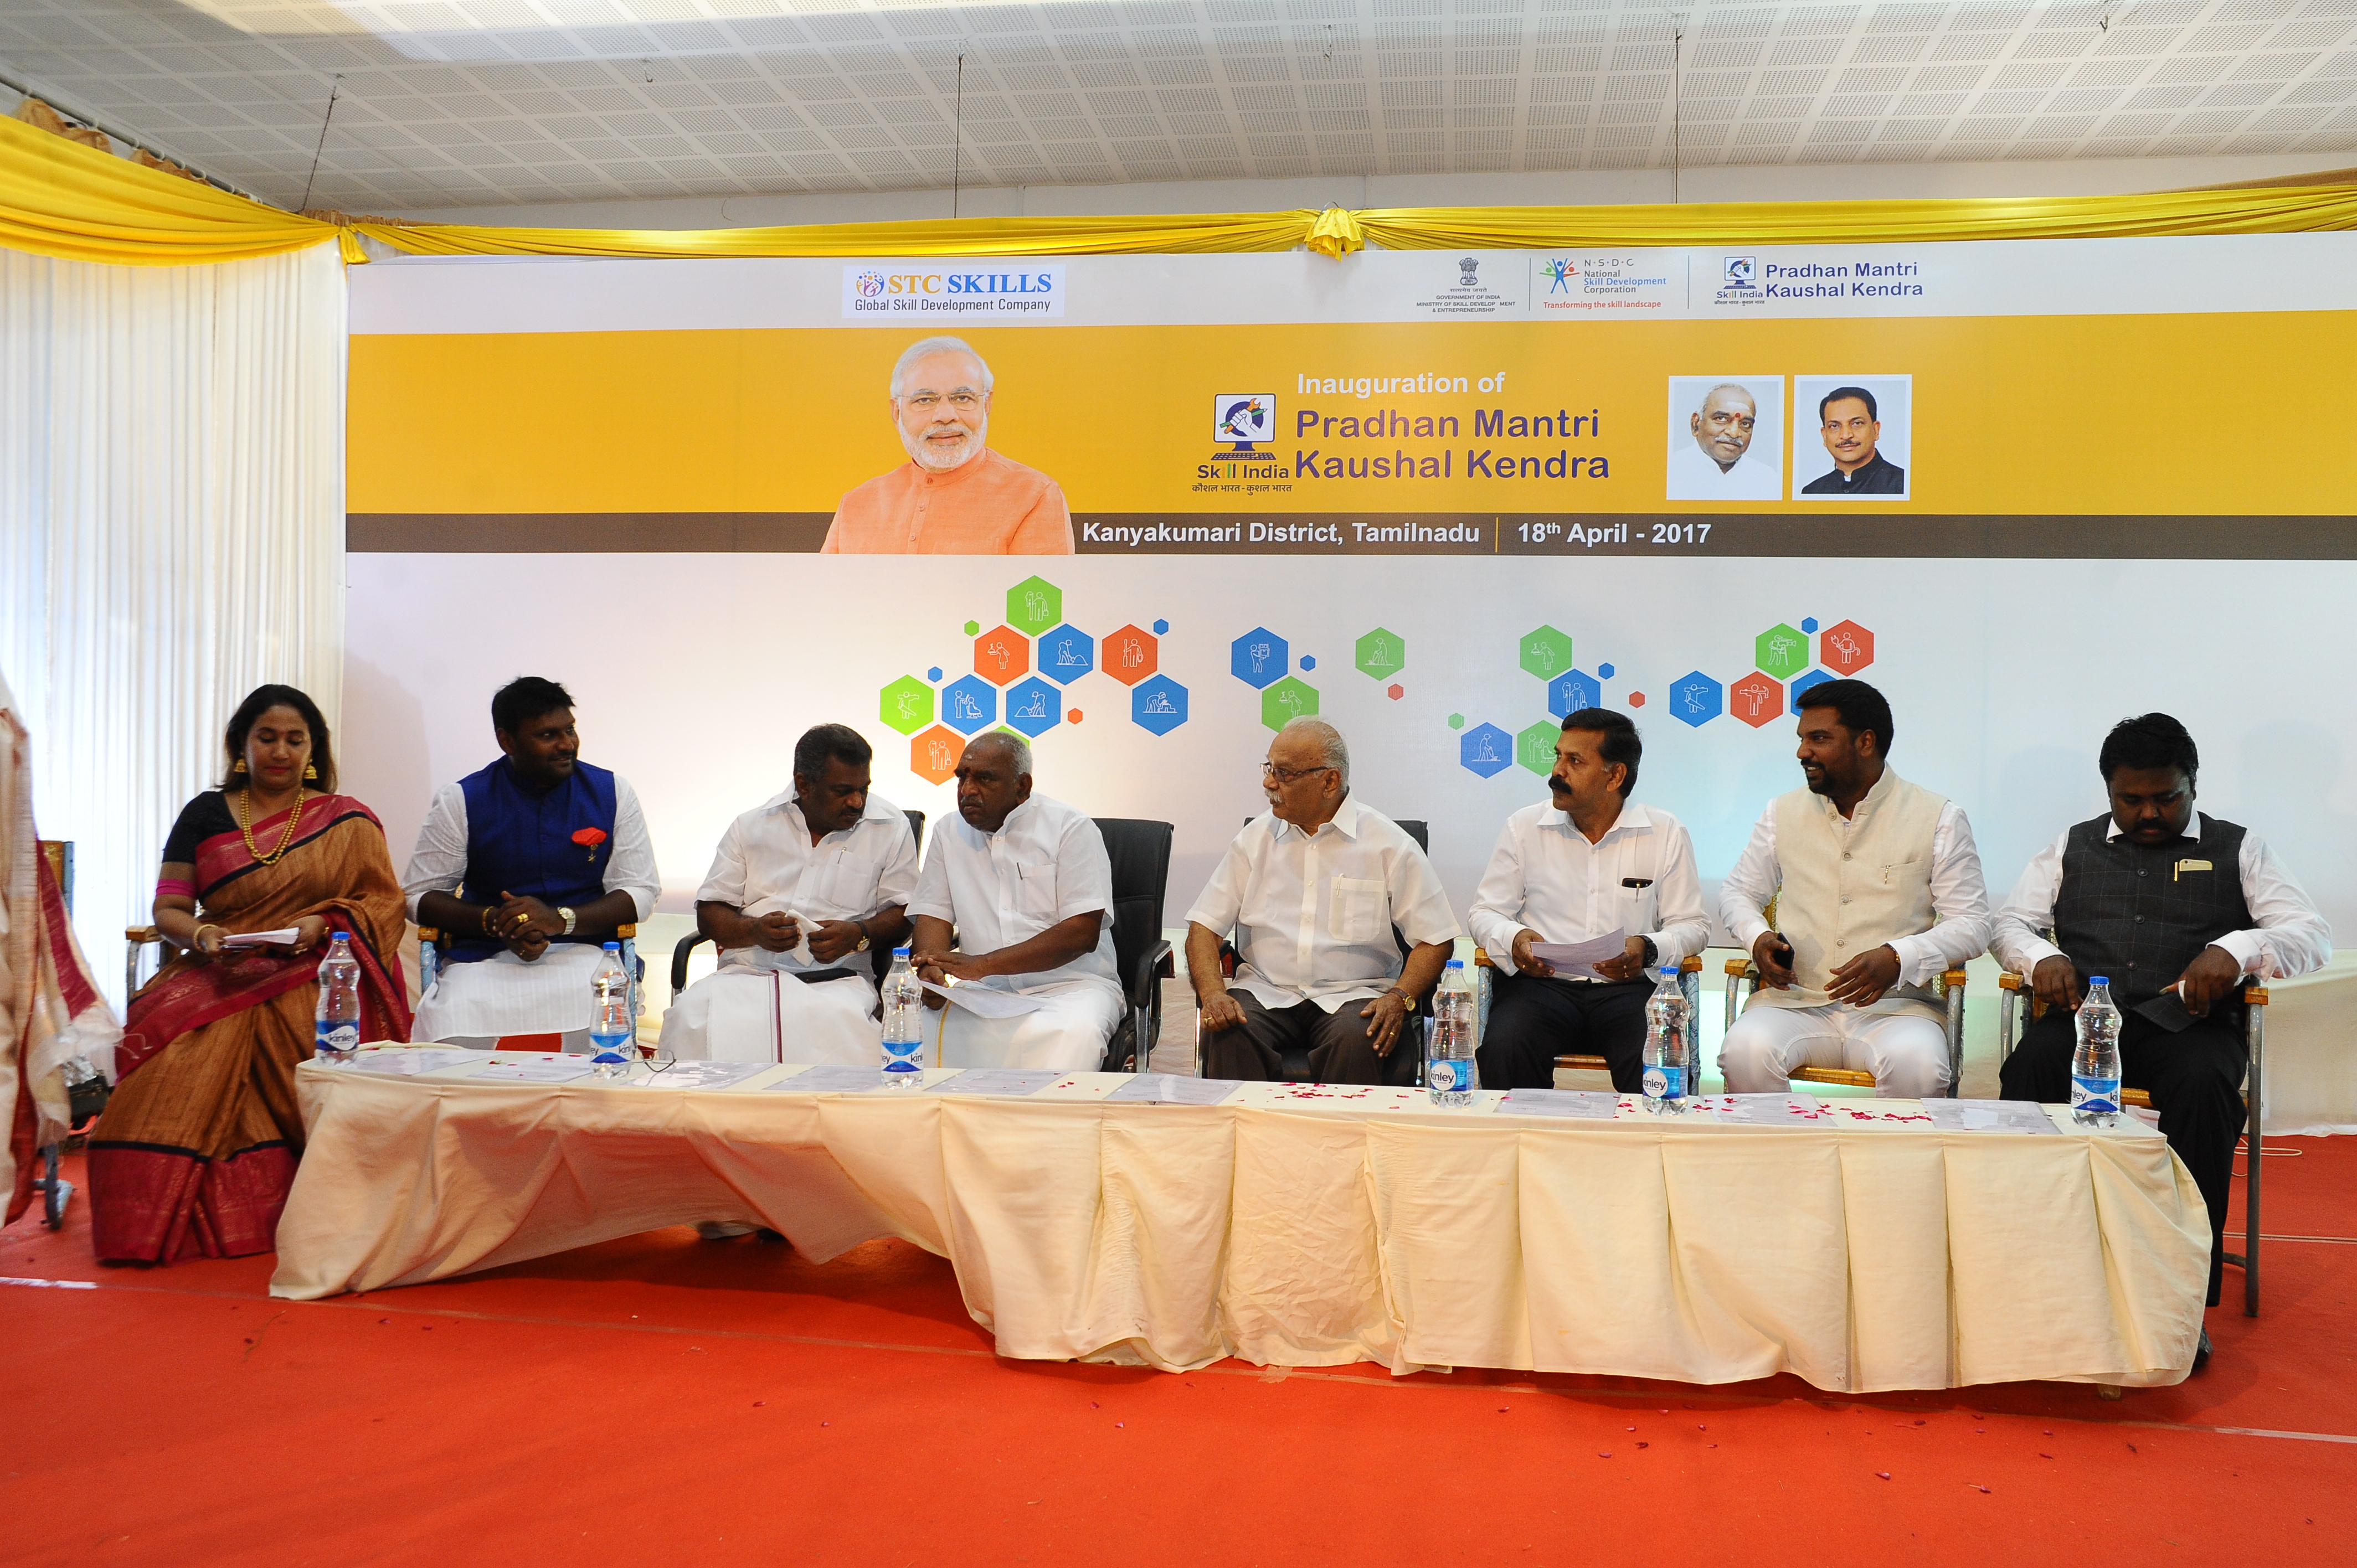 Blog Archive STC Skills launches its first PMKK center at Nagercoil, TamilNadu STC Skills image